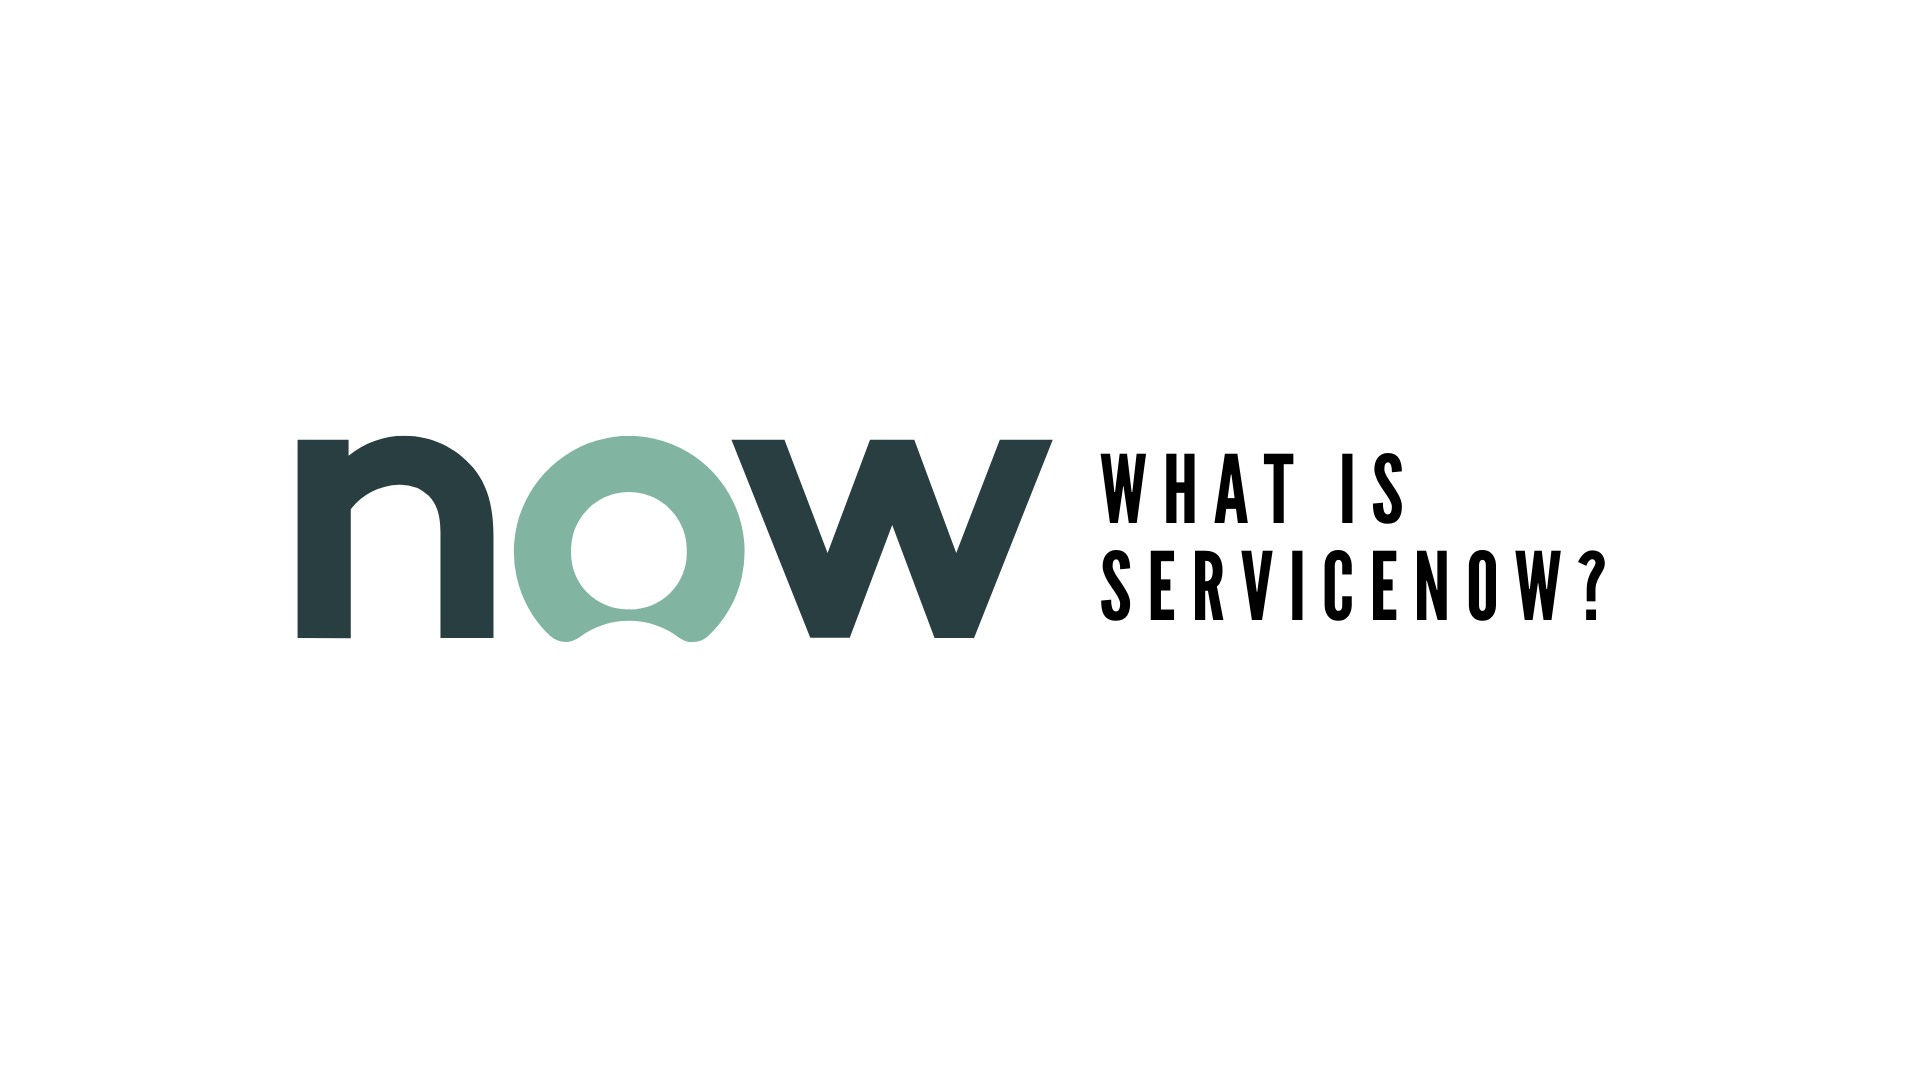 what is servicenow?